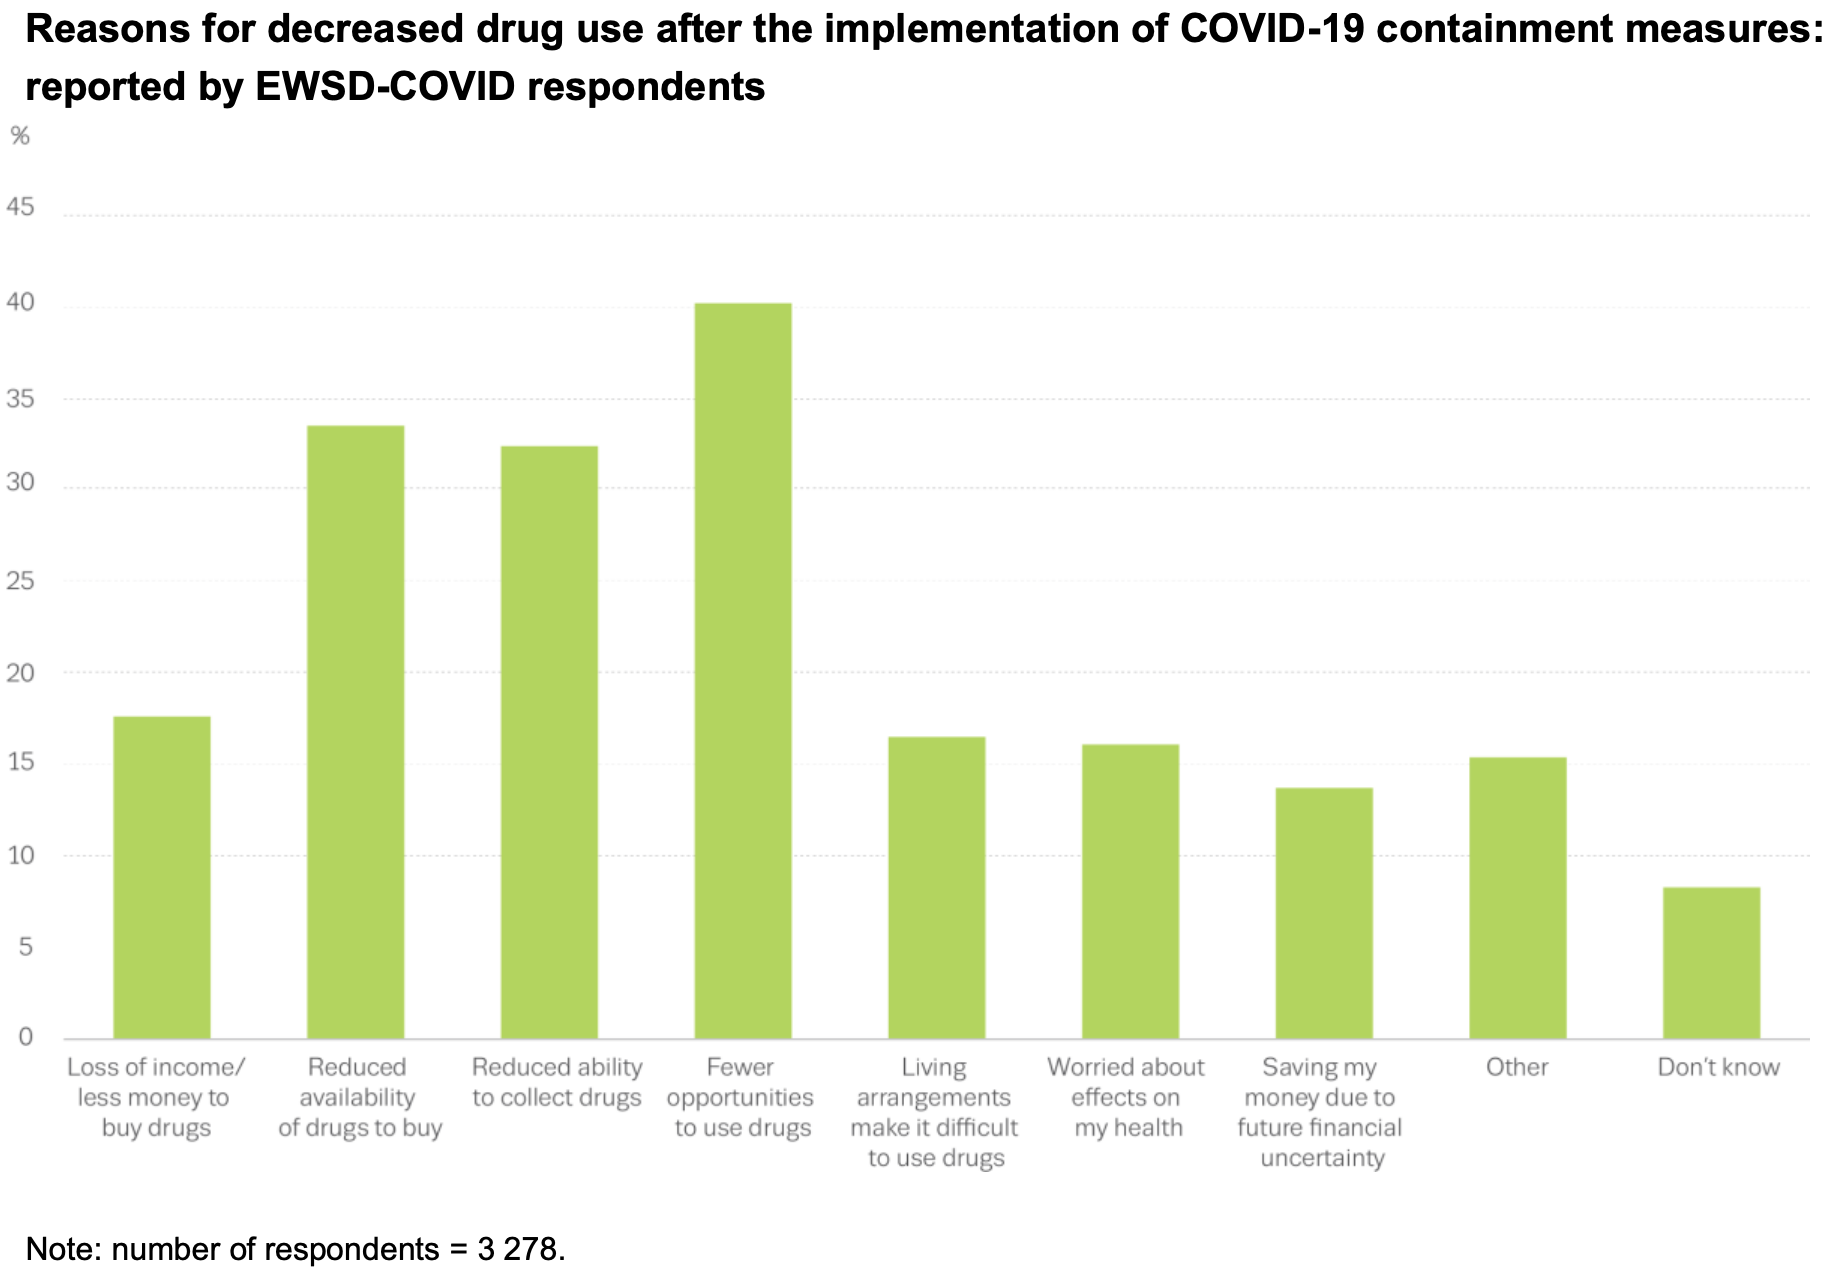 A chart showing reasons for decreased drug use in Europe during COVID-19, with reduced access to settings where drugs are used being most common